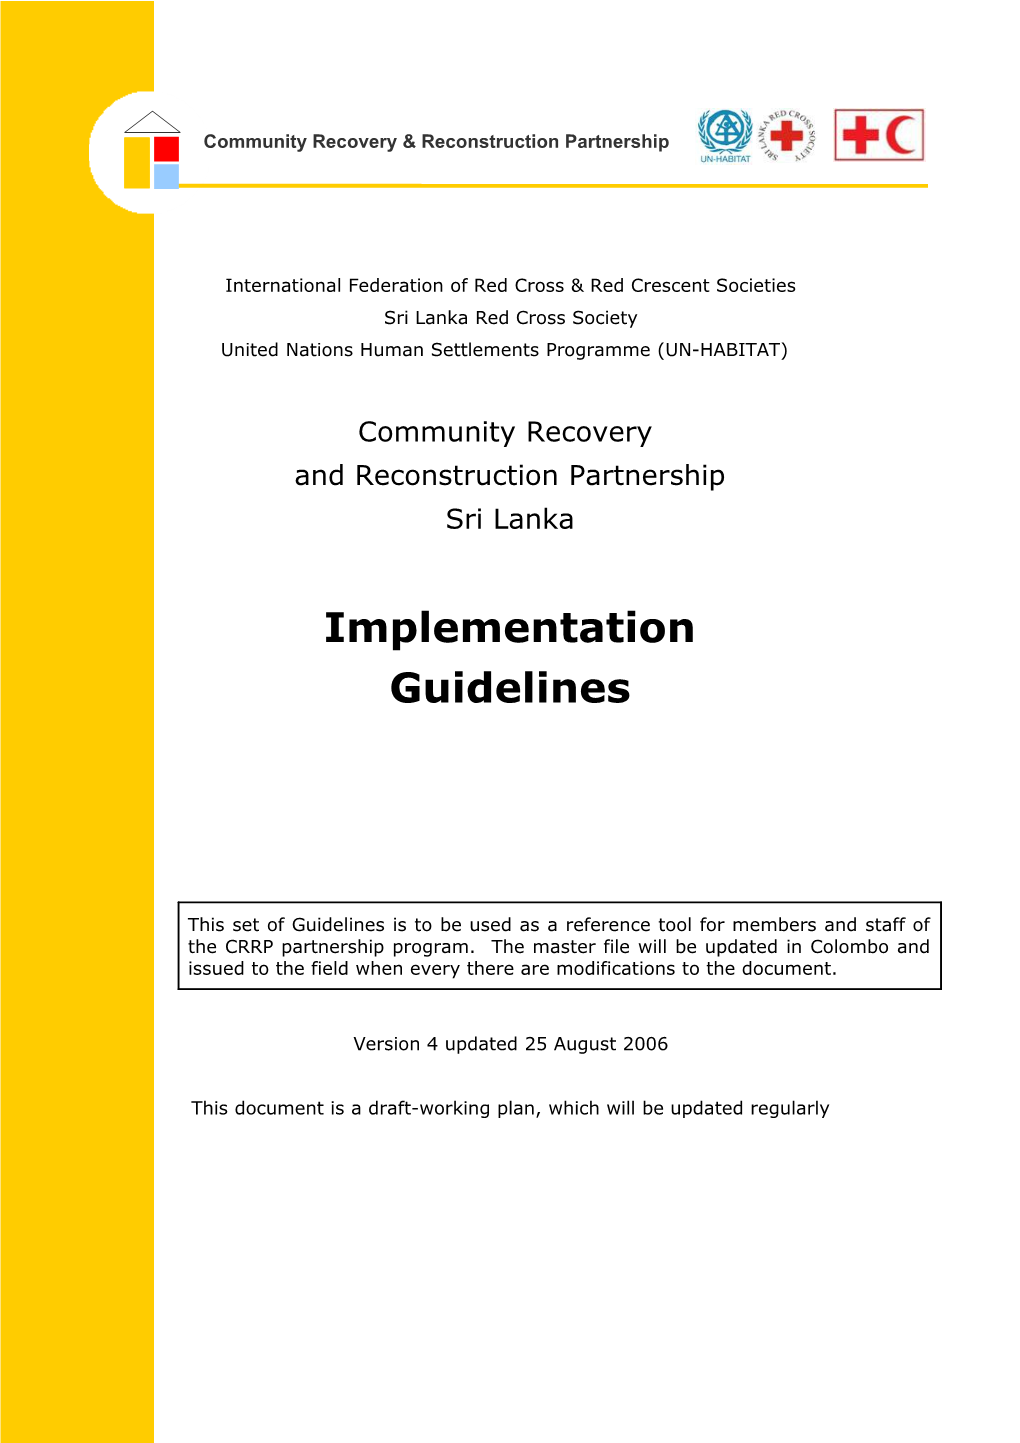 CRRP Partnership Implement Guidelines